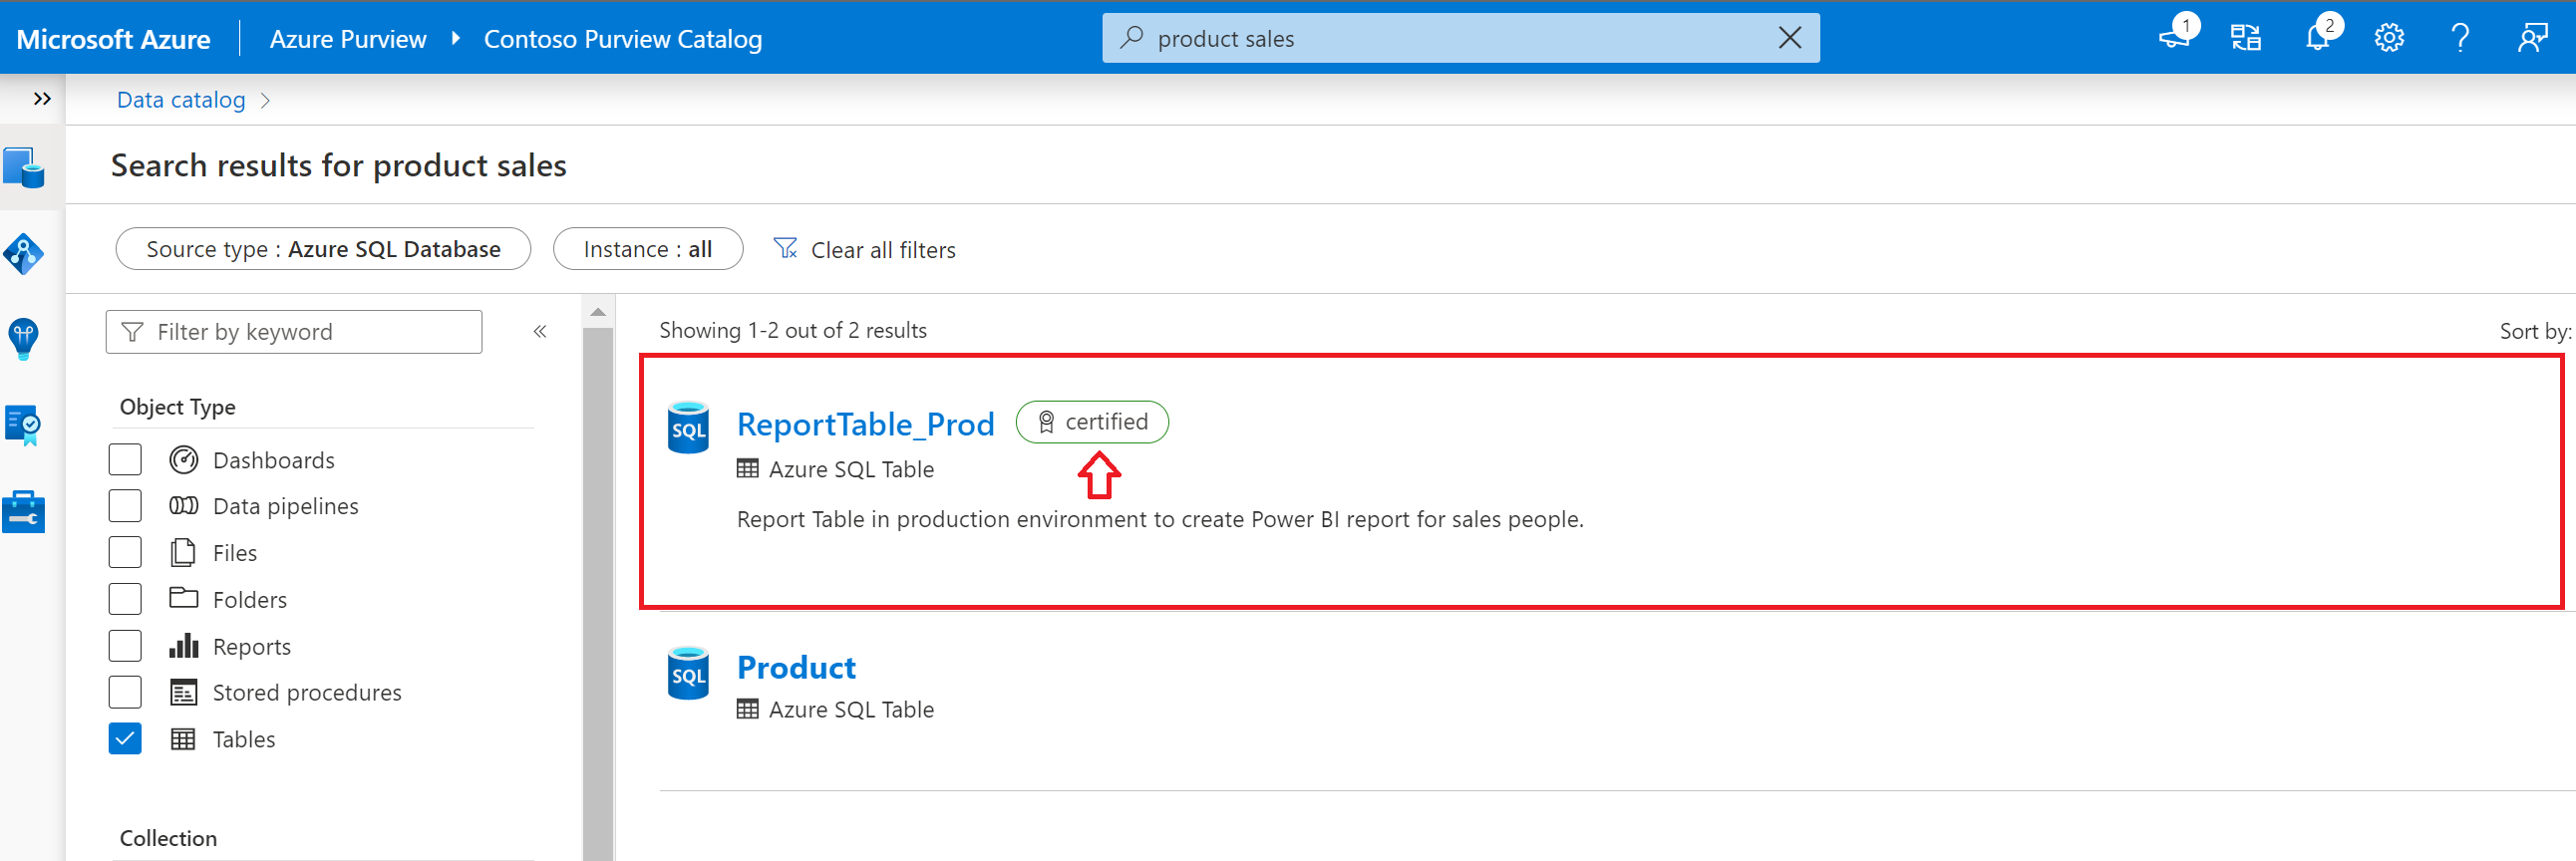 Microsoft Purview data catalog search results, displaying two Azure SQL database tables, one of which is certified.